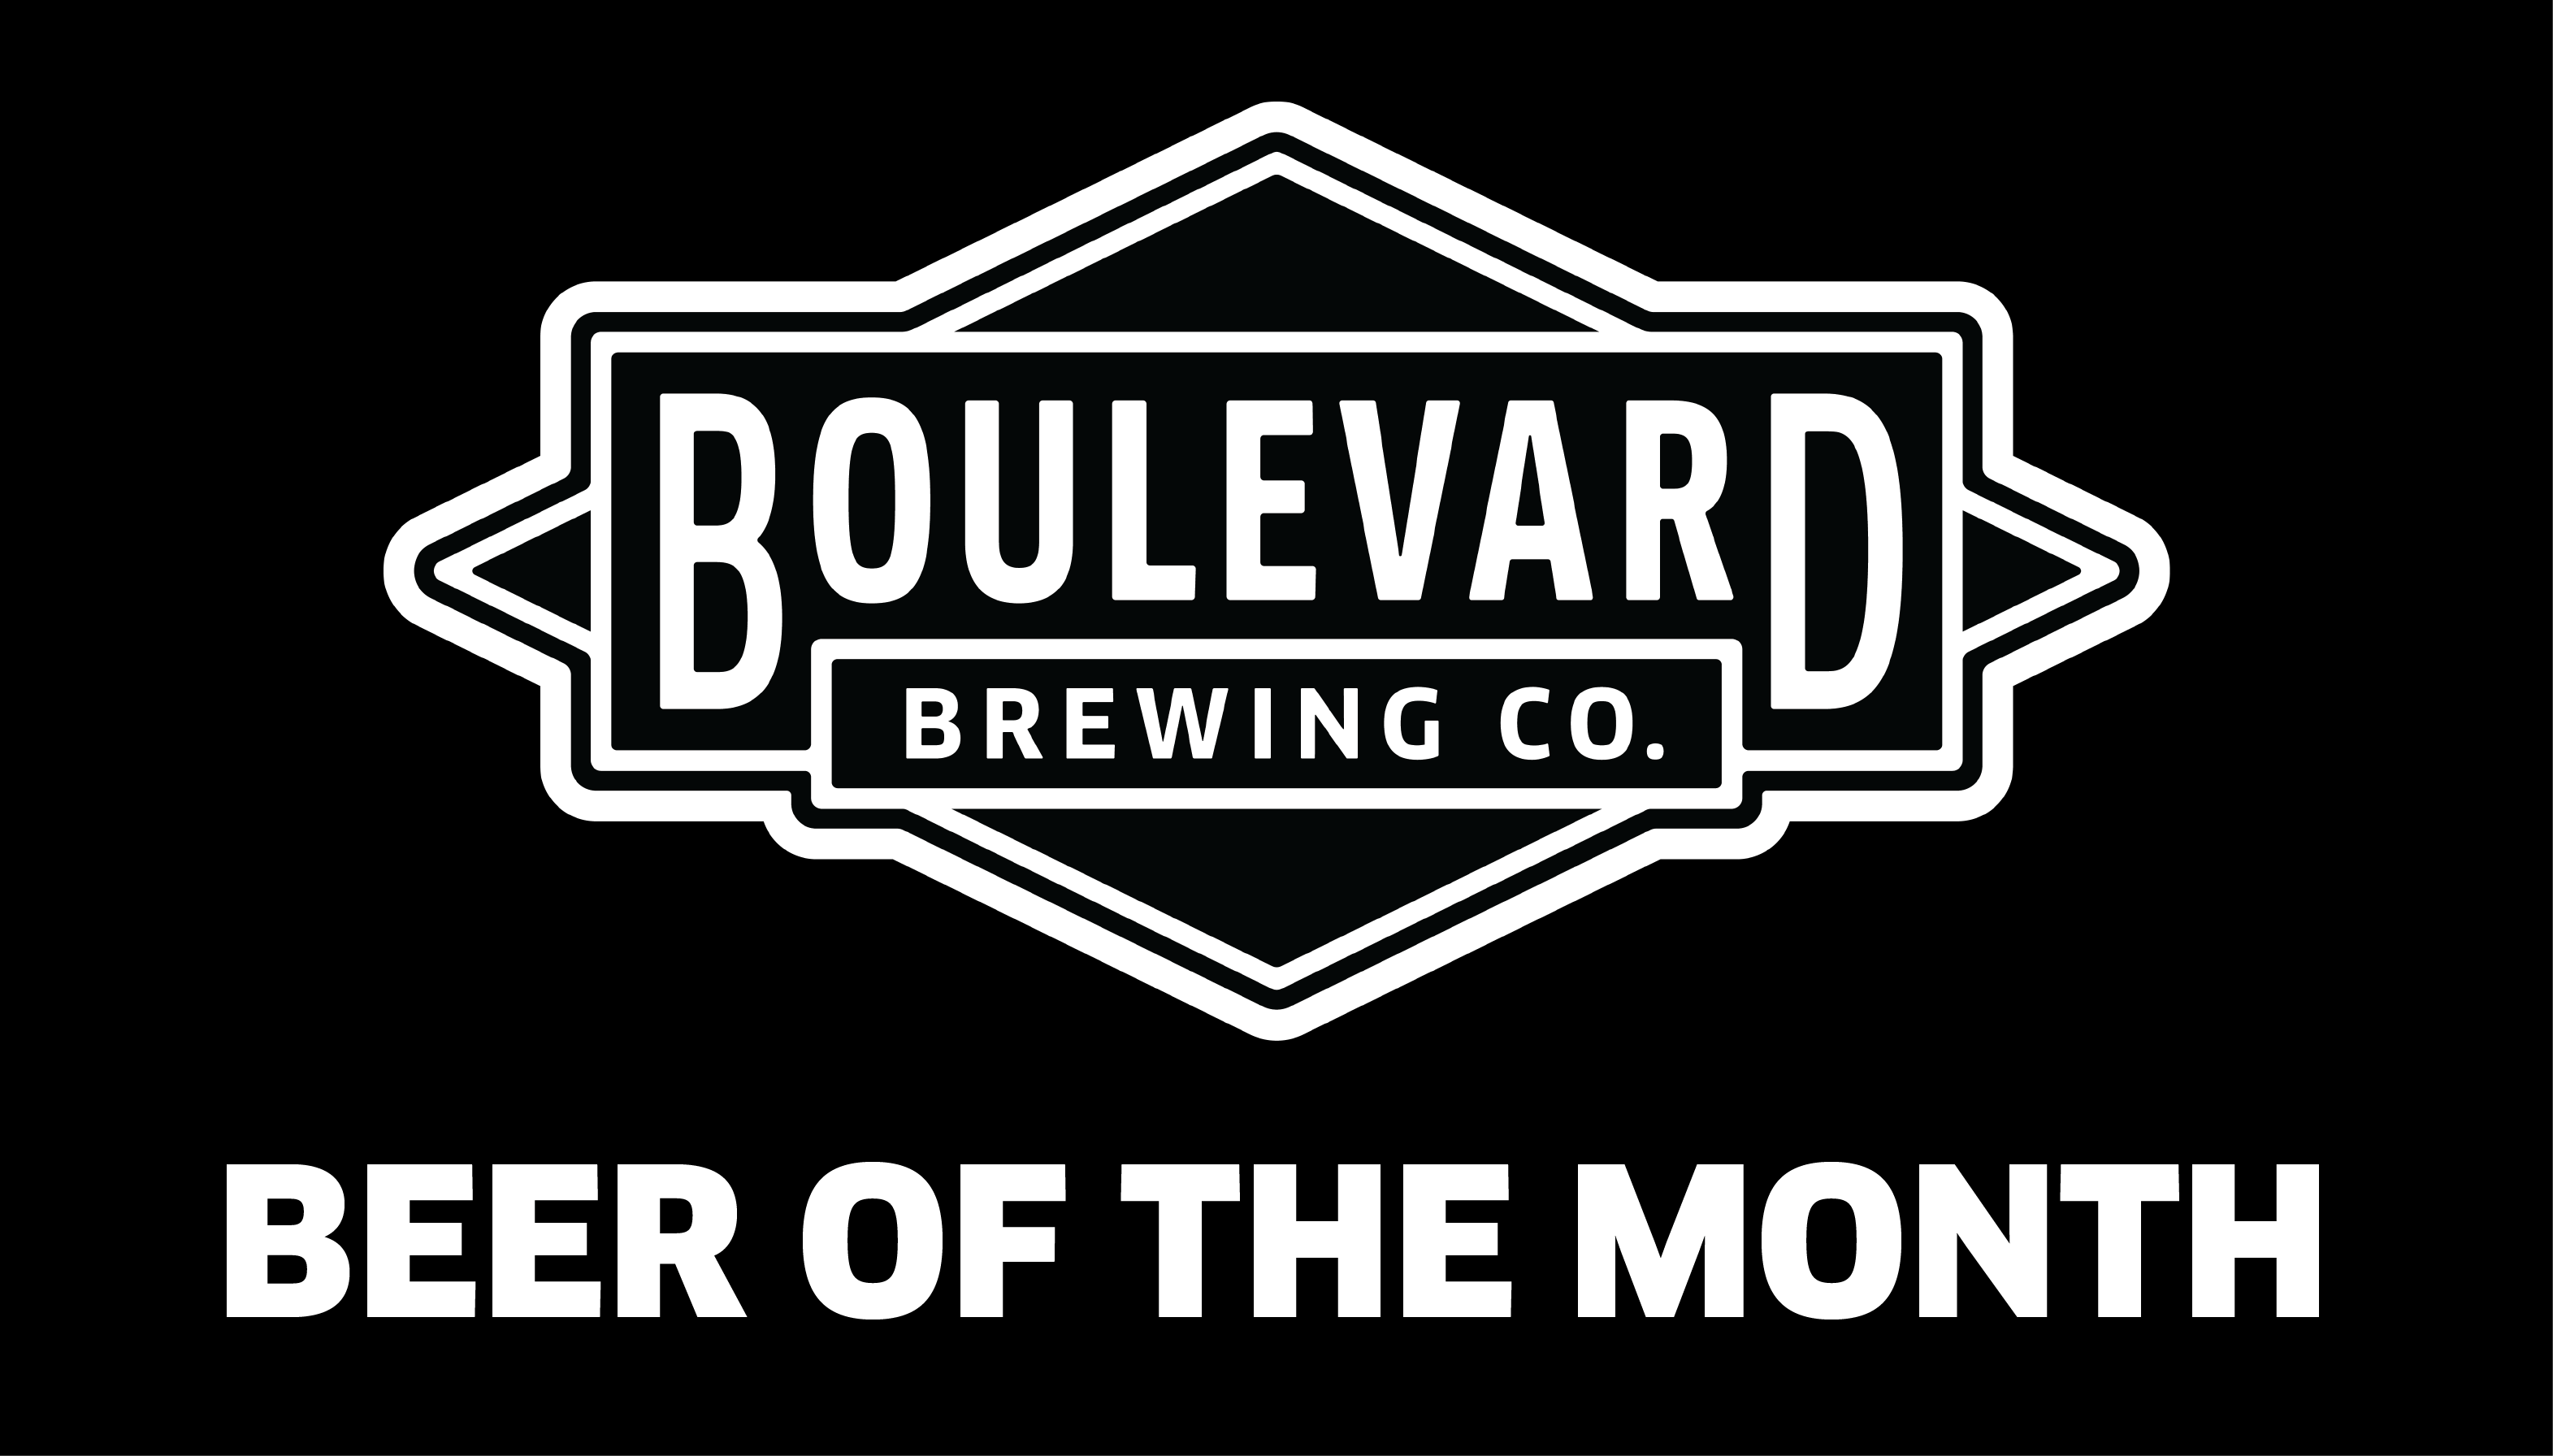 Blvd Beer Logo - Beer of the Month at Circle 7 Ranch | Boulevard Brewing Company